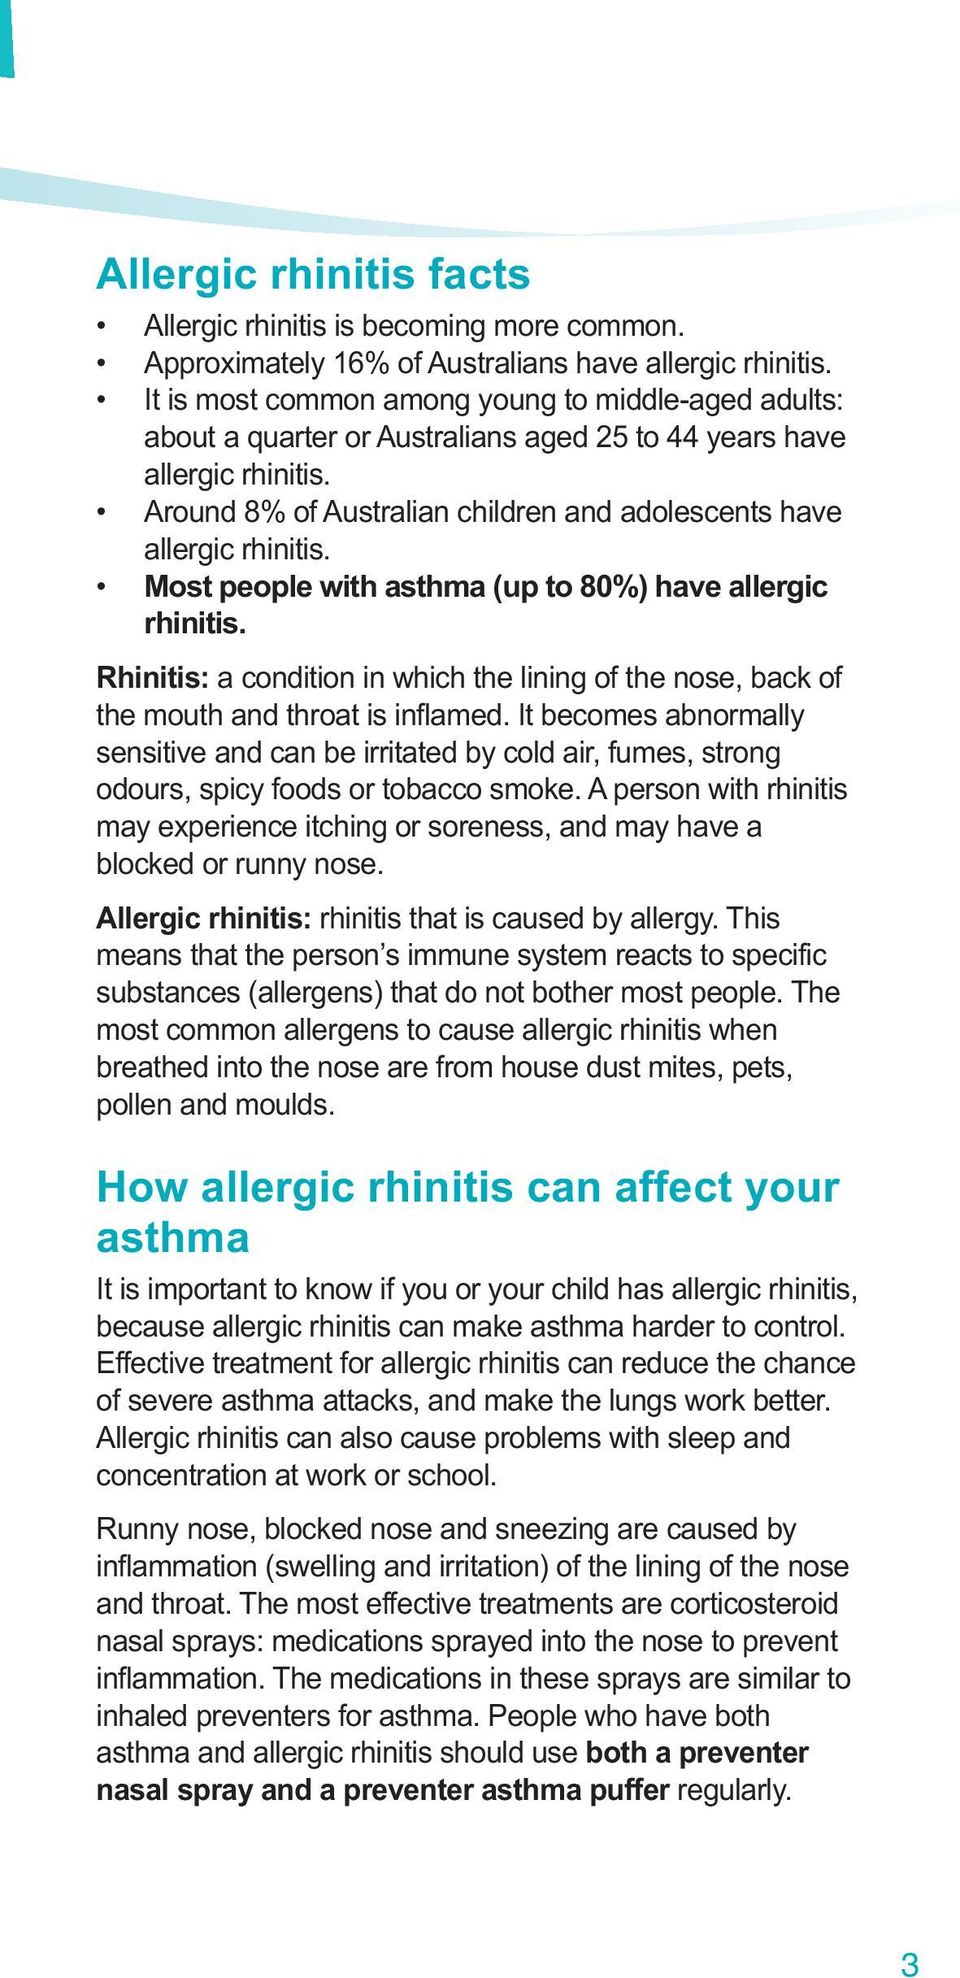 Most people with asthma (up to 80%) have allergic rhinitis. Rhinitis: a condition in which the lining of the nose, back of the mouth and throat is inflamed.